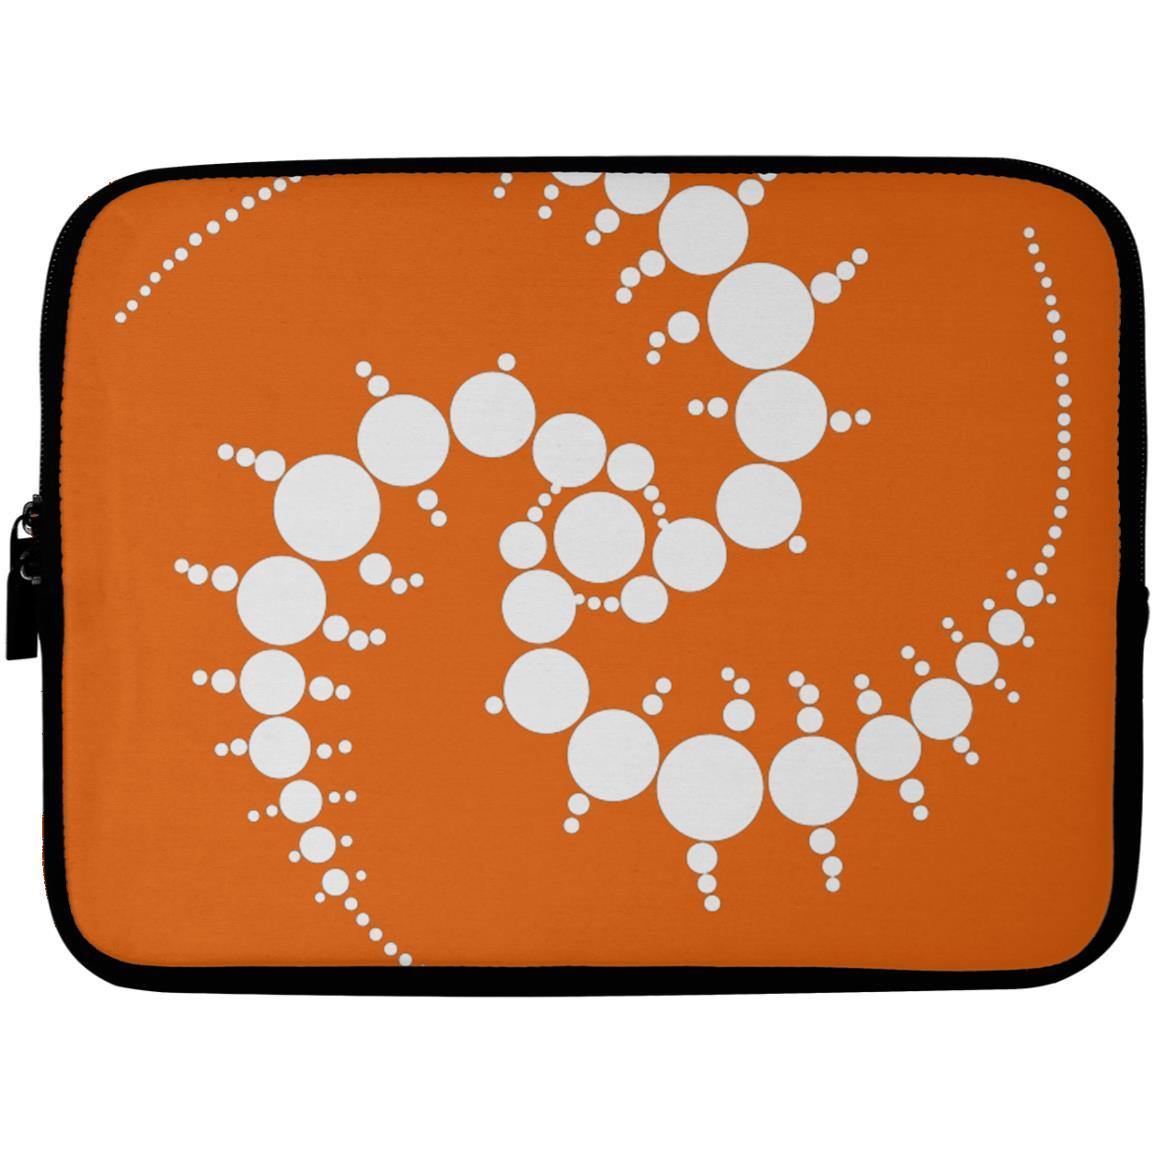 Crop Circle Laptop Sleeve - Windmill Hill - Shapes of Wisdom